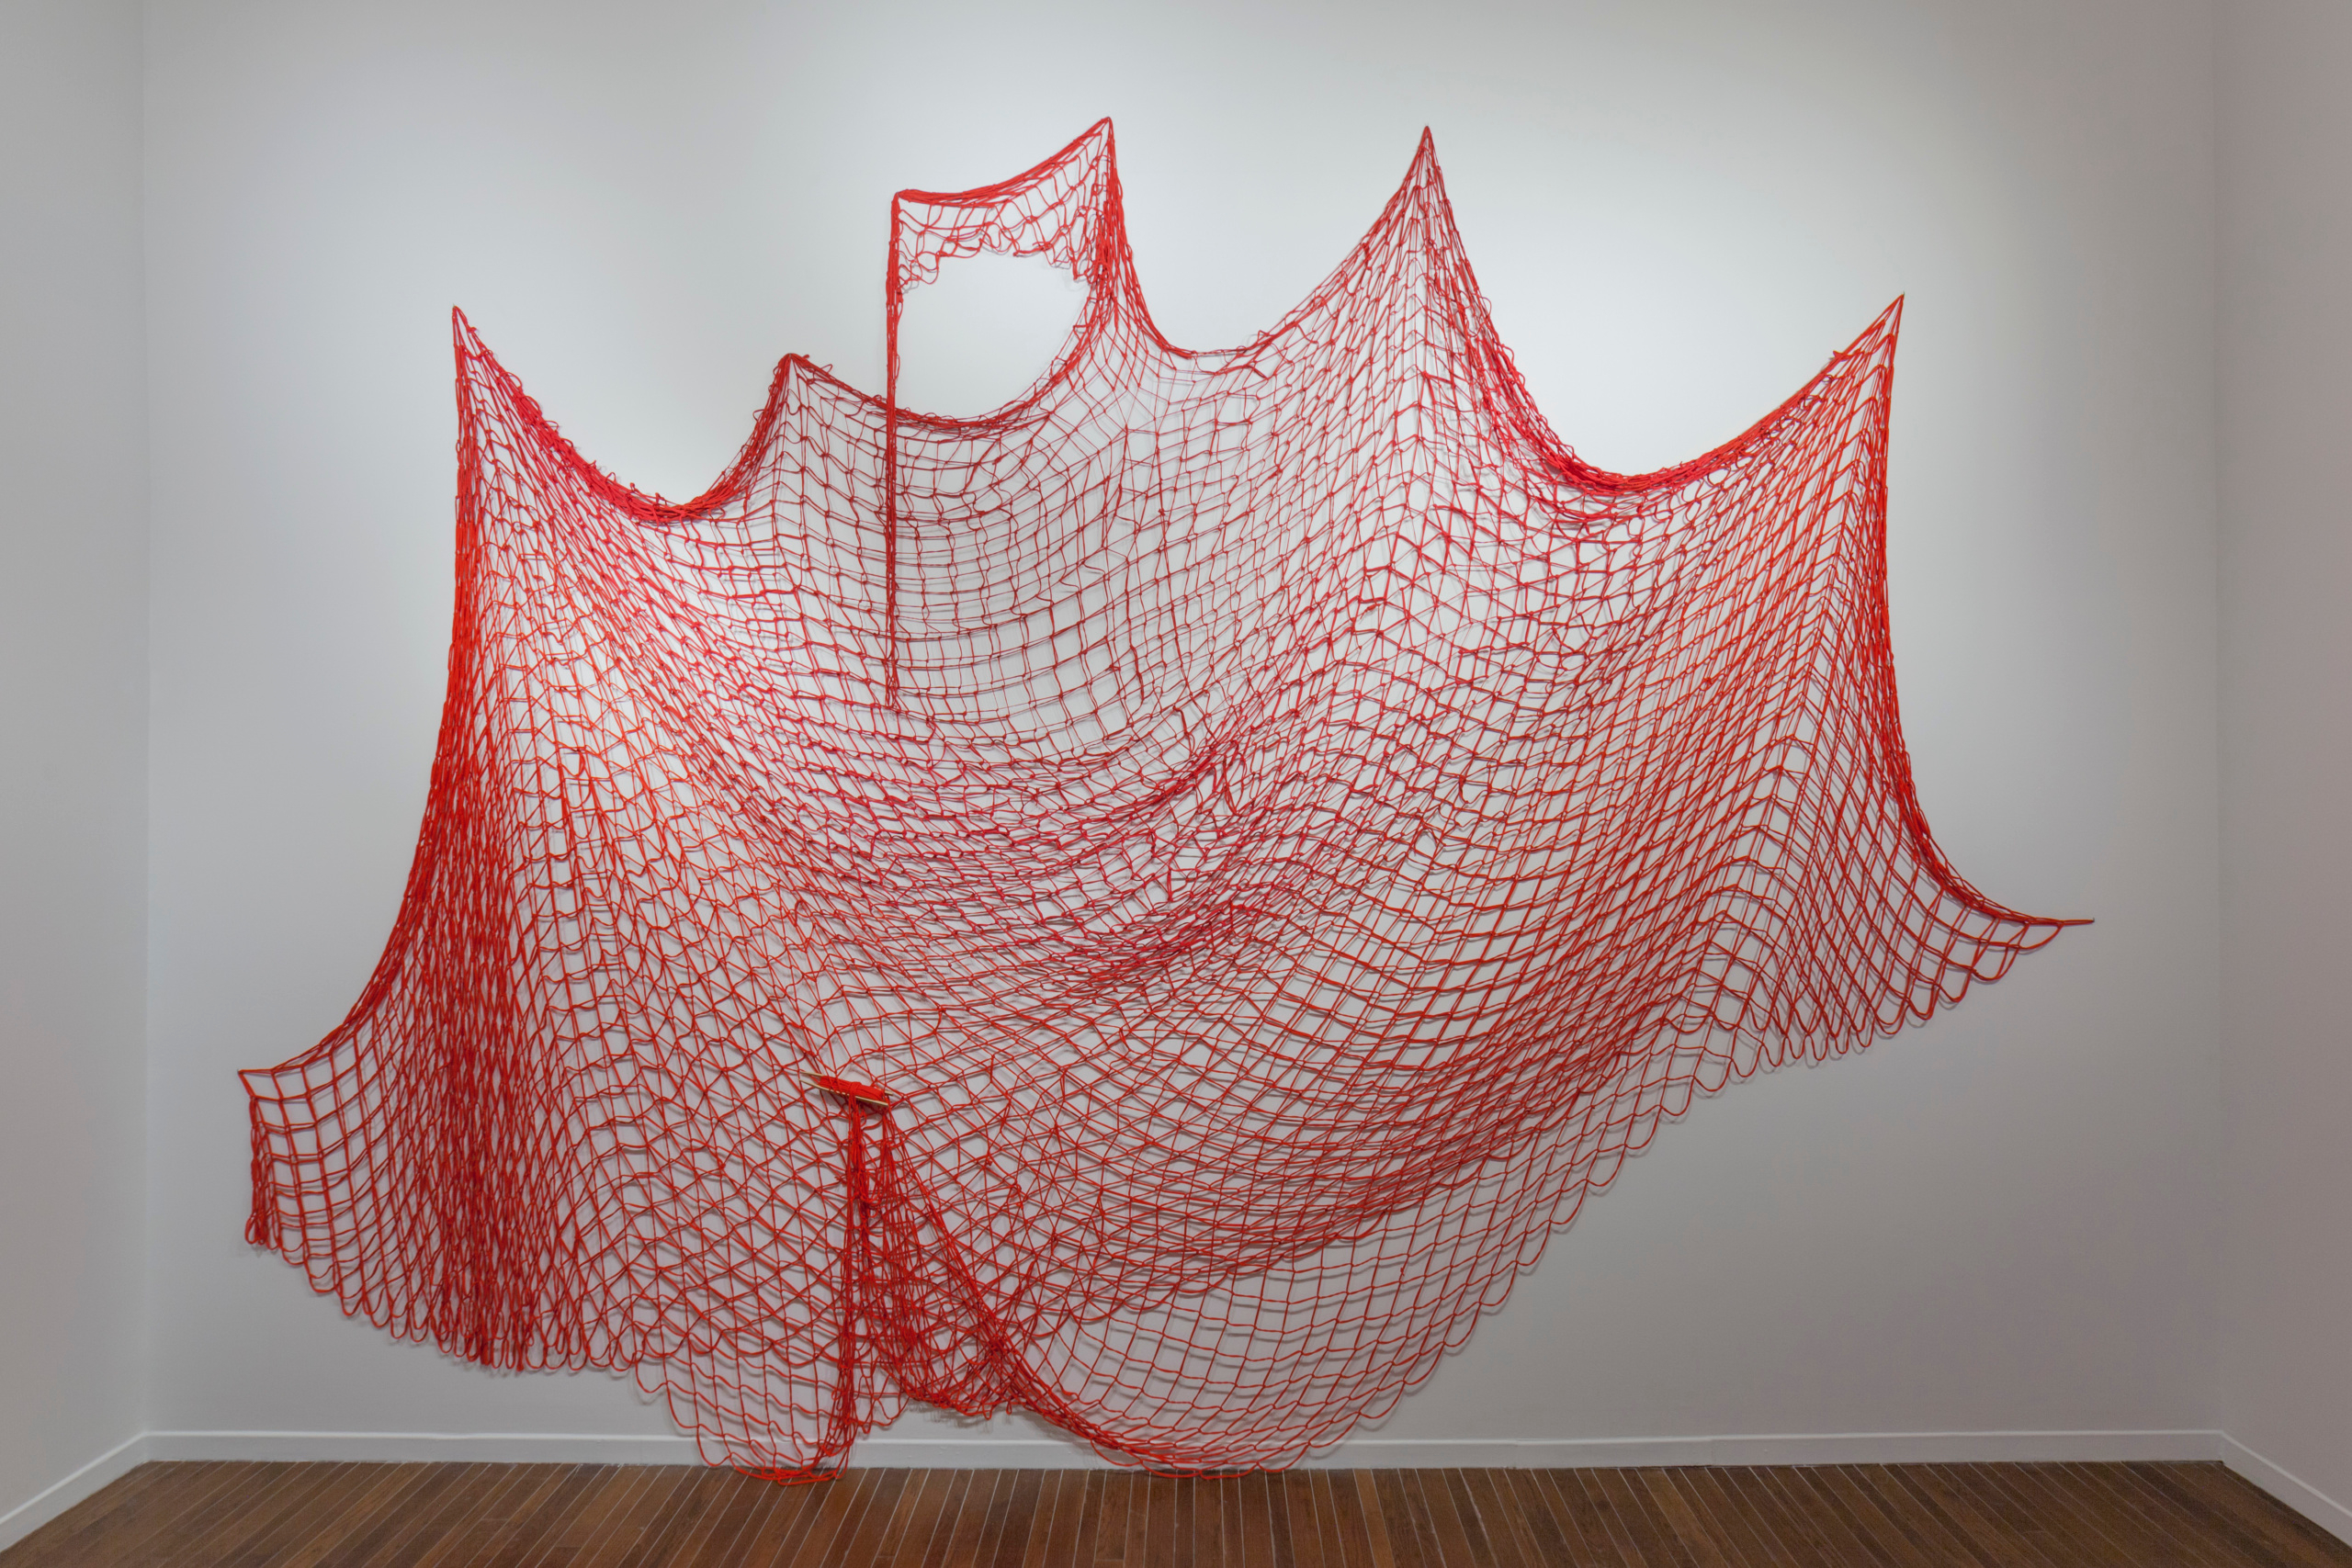     Installation view, Nadia Myre, Red Net (working title), 2019. Recycled cotton jersey.
Photo: Darren Rigo. Courtesy of the Textile Museum of Canada. 

